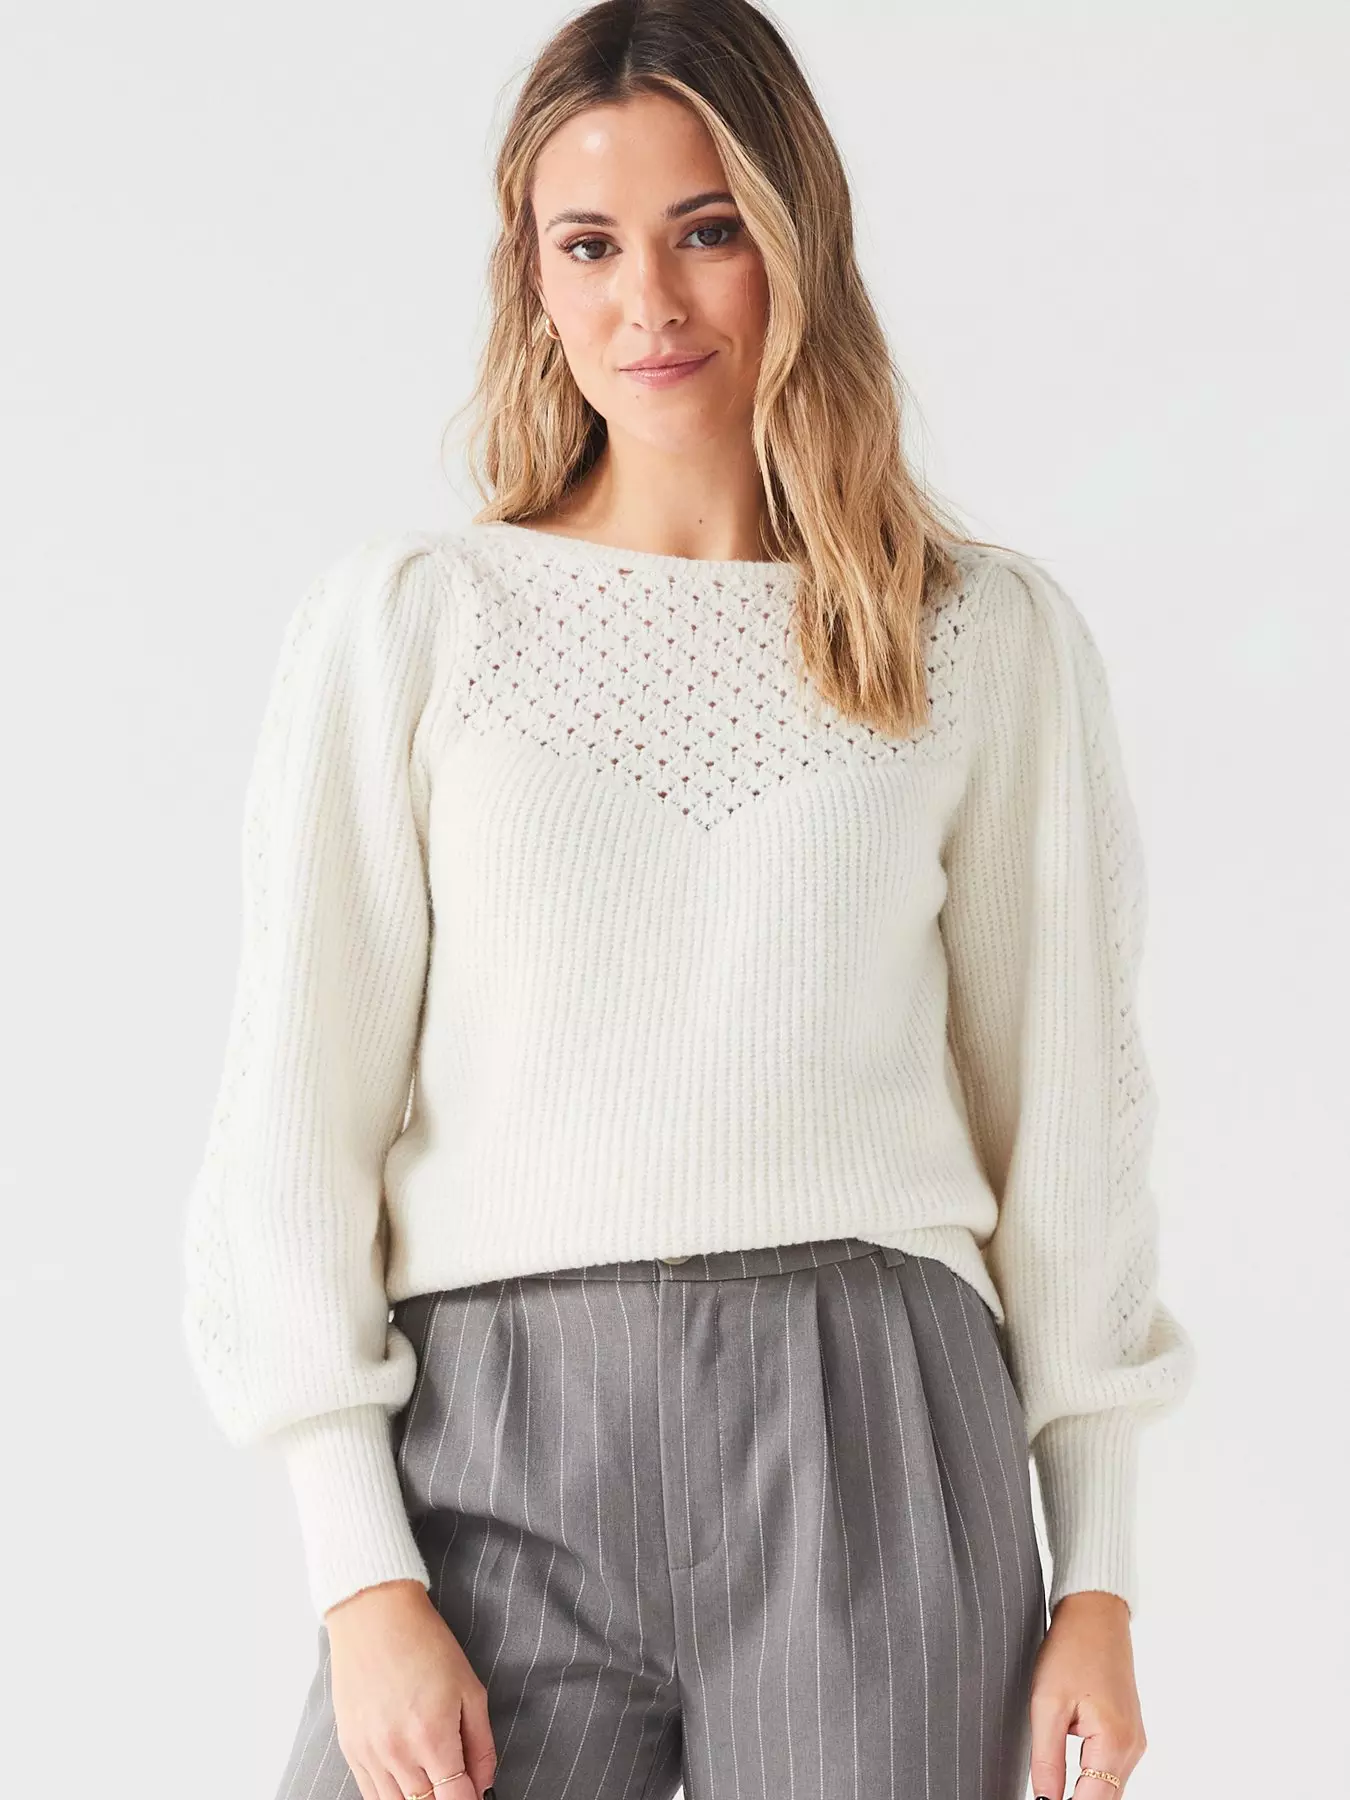 Buy White Pointelle Square Neck Jumper from Next Ireland